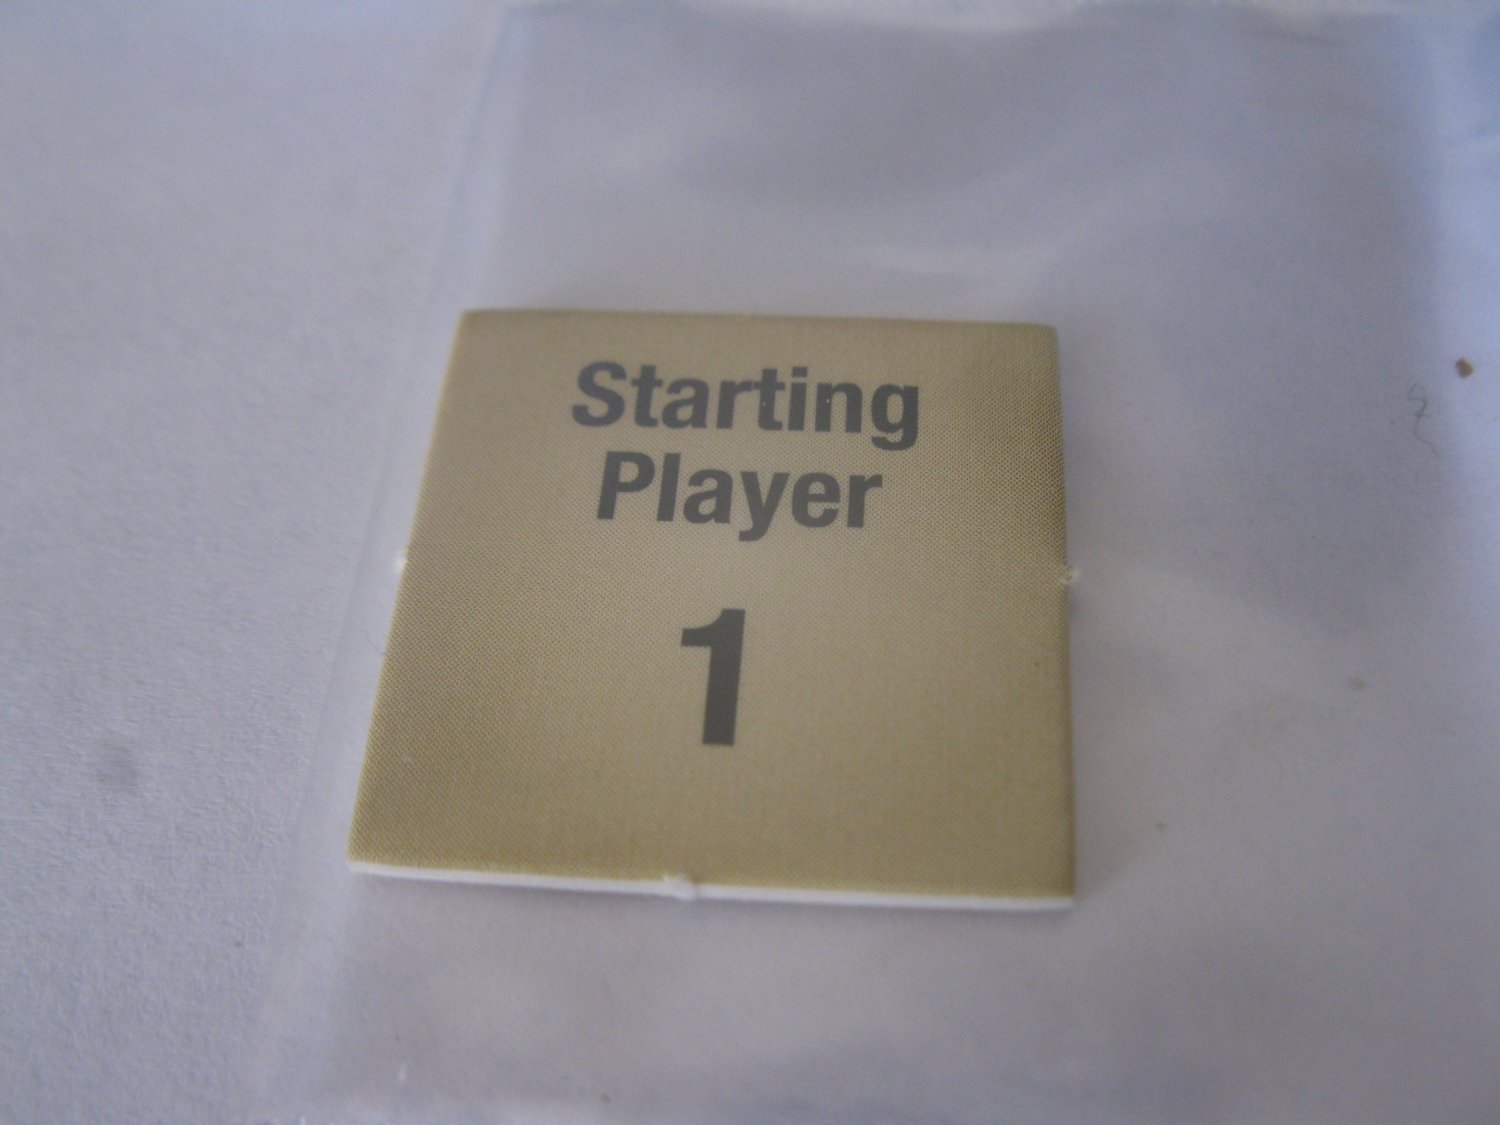 2003 Age of Mythology Board Game Piece: Starting Player 1 Tile